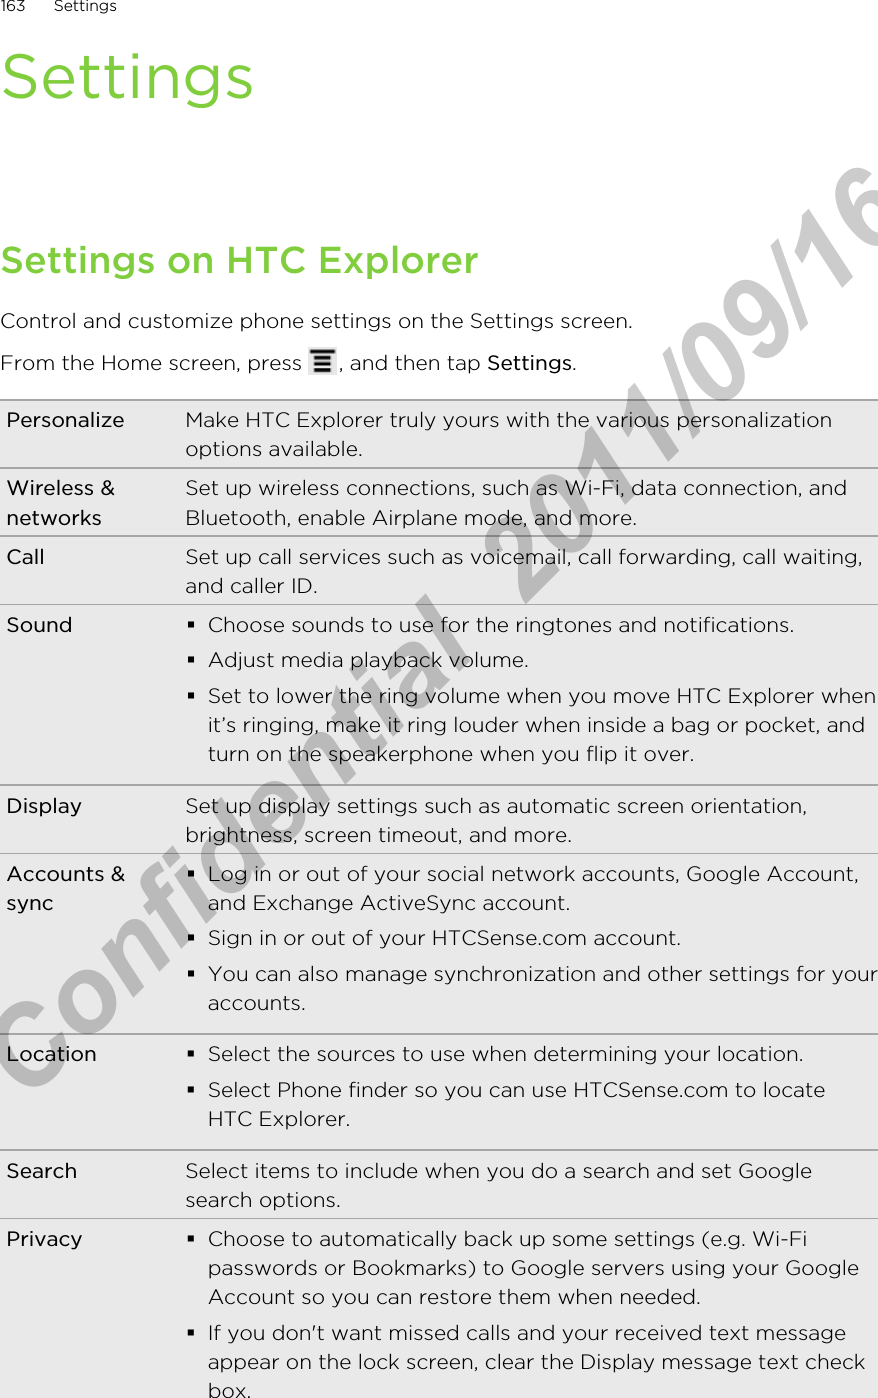 SettingsSettings on HTC ExplorerControl and customize phone settings on the Settings screen.From the Home screen, press  , and then tap Settings.Personalize Make HTC Explorer truly yours with the various personalizationoptions available.Wireless &amp;networksSet up wireless connections, such as Wi-Fi, data connection, andBluetooth, enable Airplane mode, and more.Call Set up call services such as voicemail, call forwarding, call waiting,and caller ID.Sound §Choose sounds to use for the ringtones and notifications.§Adjust media playback volume.§Set to lower the ring volume when you move HTC Explorer whenit’s ringing, make it ring louder when inside a bag or pocket, andturn on the speakerphone when you flip it over.Display Set up display settings such as automatic screen orientation,brightness, screen timeout, and more.Accounts &amp;sync§Log in or out of your social network accounts, Google Account,and Exchange ActiveSync account.§Sign in or out of your HTCSense.com account.§You can also manage synchronization and other settings for youraccounts.Location §Select the sources to use when determining your location.§Select Phone finder so you can use HTCSense.com to locateHTC Explorer.Search Select items to include when you do a search and set Googlesearch options.Privacy §Choose to automatically back up some settings (e.g. Wi-Fipasswords or Bookmarks) to Google servers using your GoogleAccount so you can restore them when needed.§If you don&apos;t want missed calls and your received text messageappear on the lock screen, clear the Display message text checkbox.163 SettingsHTC Confidential  2011/09/16 